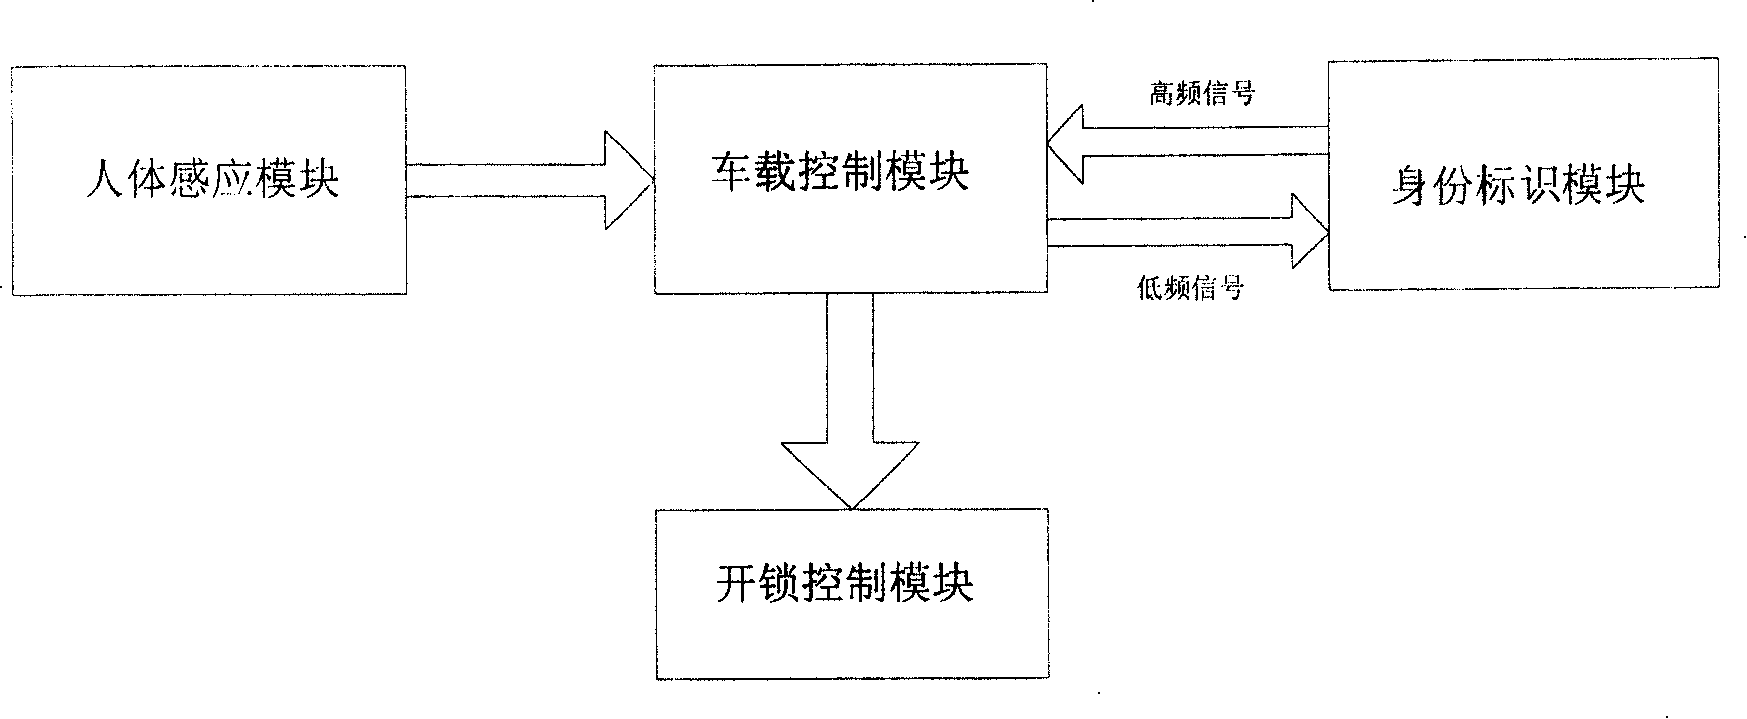 Identity recognition system for keyless entering automobile and its recognition method